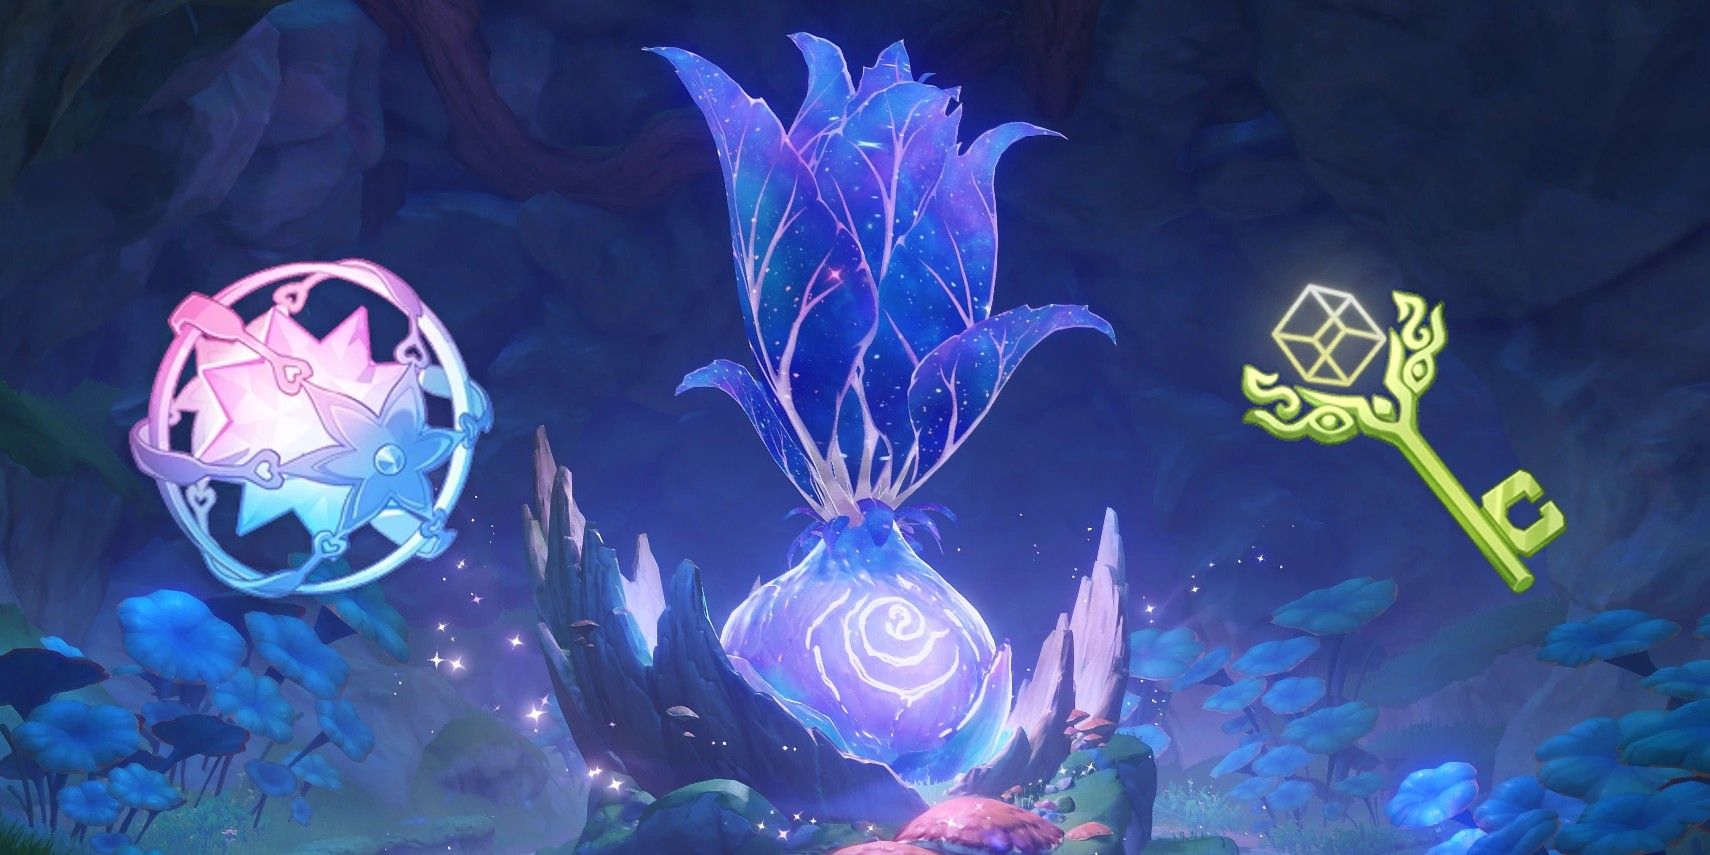 Genshin Impact's Tree of Dreams is in the middle, and on its left is an Intertwined Fate, while a Sumeru Shrine of Depths Key is on the right.